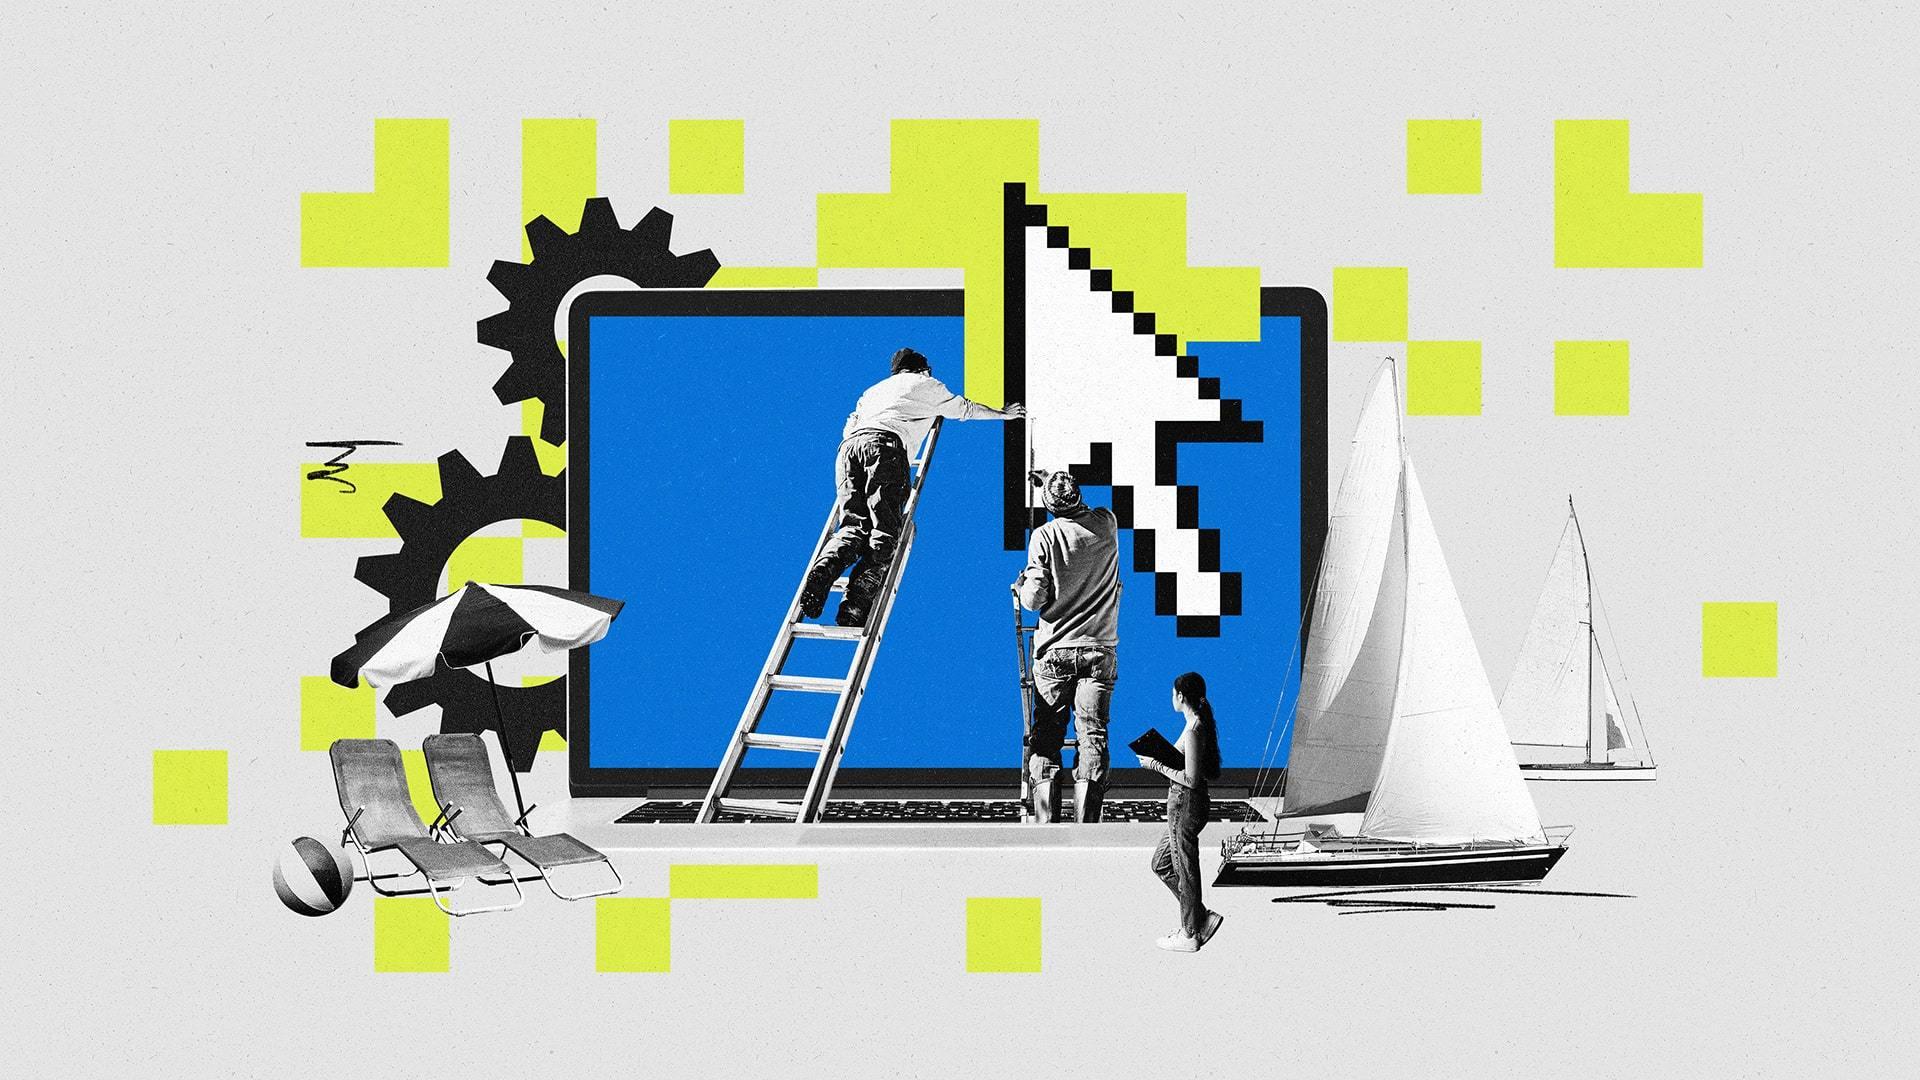 Two men on ladders affix a large cursor on a laptop amidst yachts, beach chairs, gears and oversized pixels.